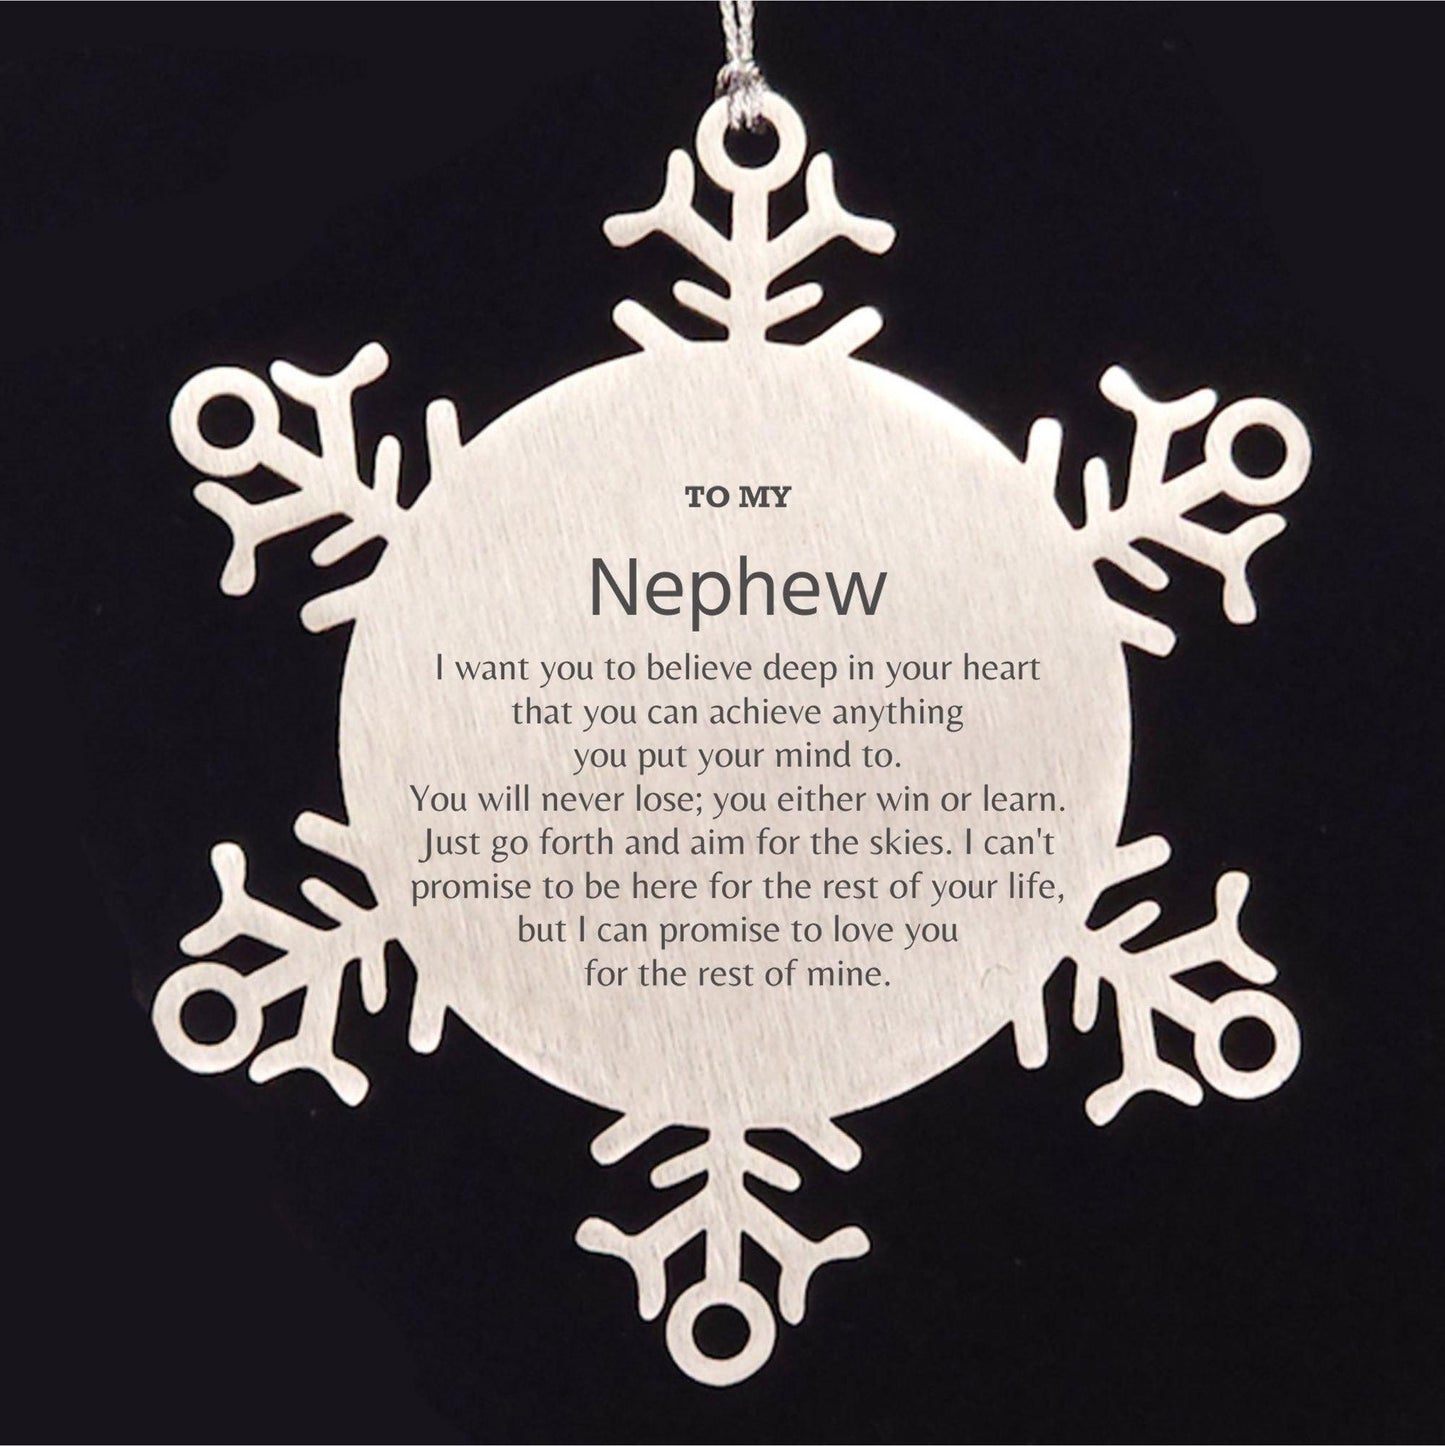 Motivational Nephew Snowflake Ornament, Nephew I can promise to love you for the rest of mine, Christmas Birthday Gift - Mallard Moon Gift Shop